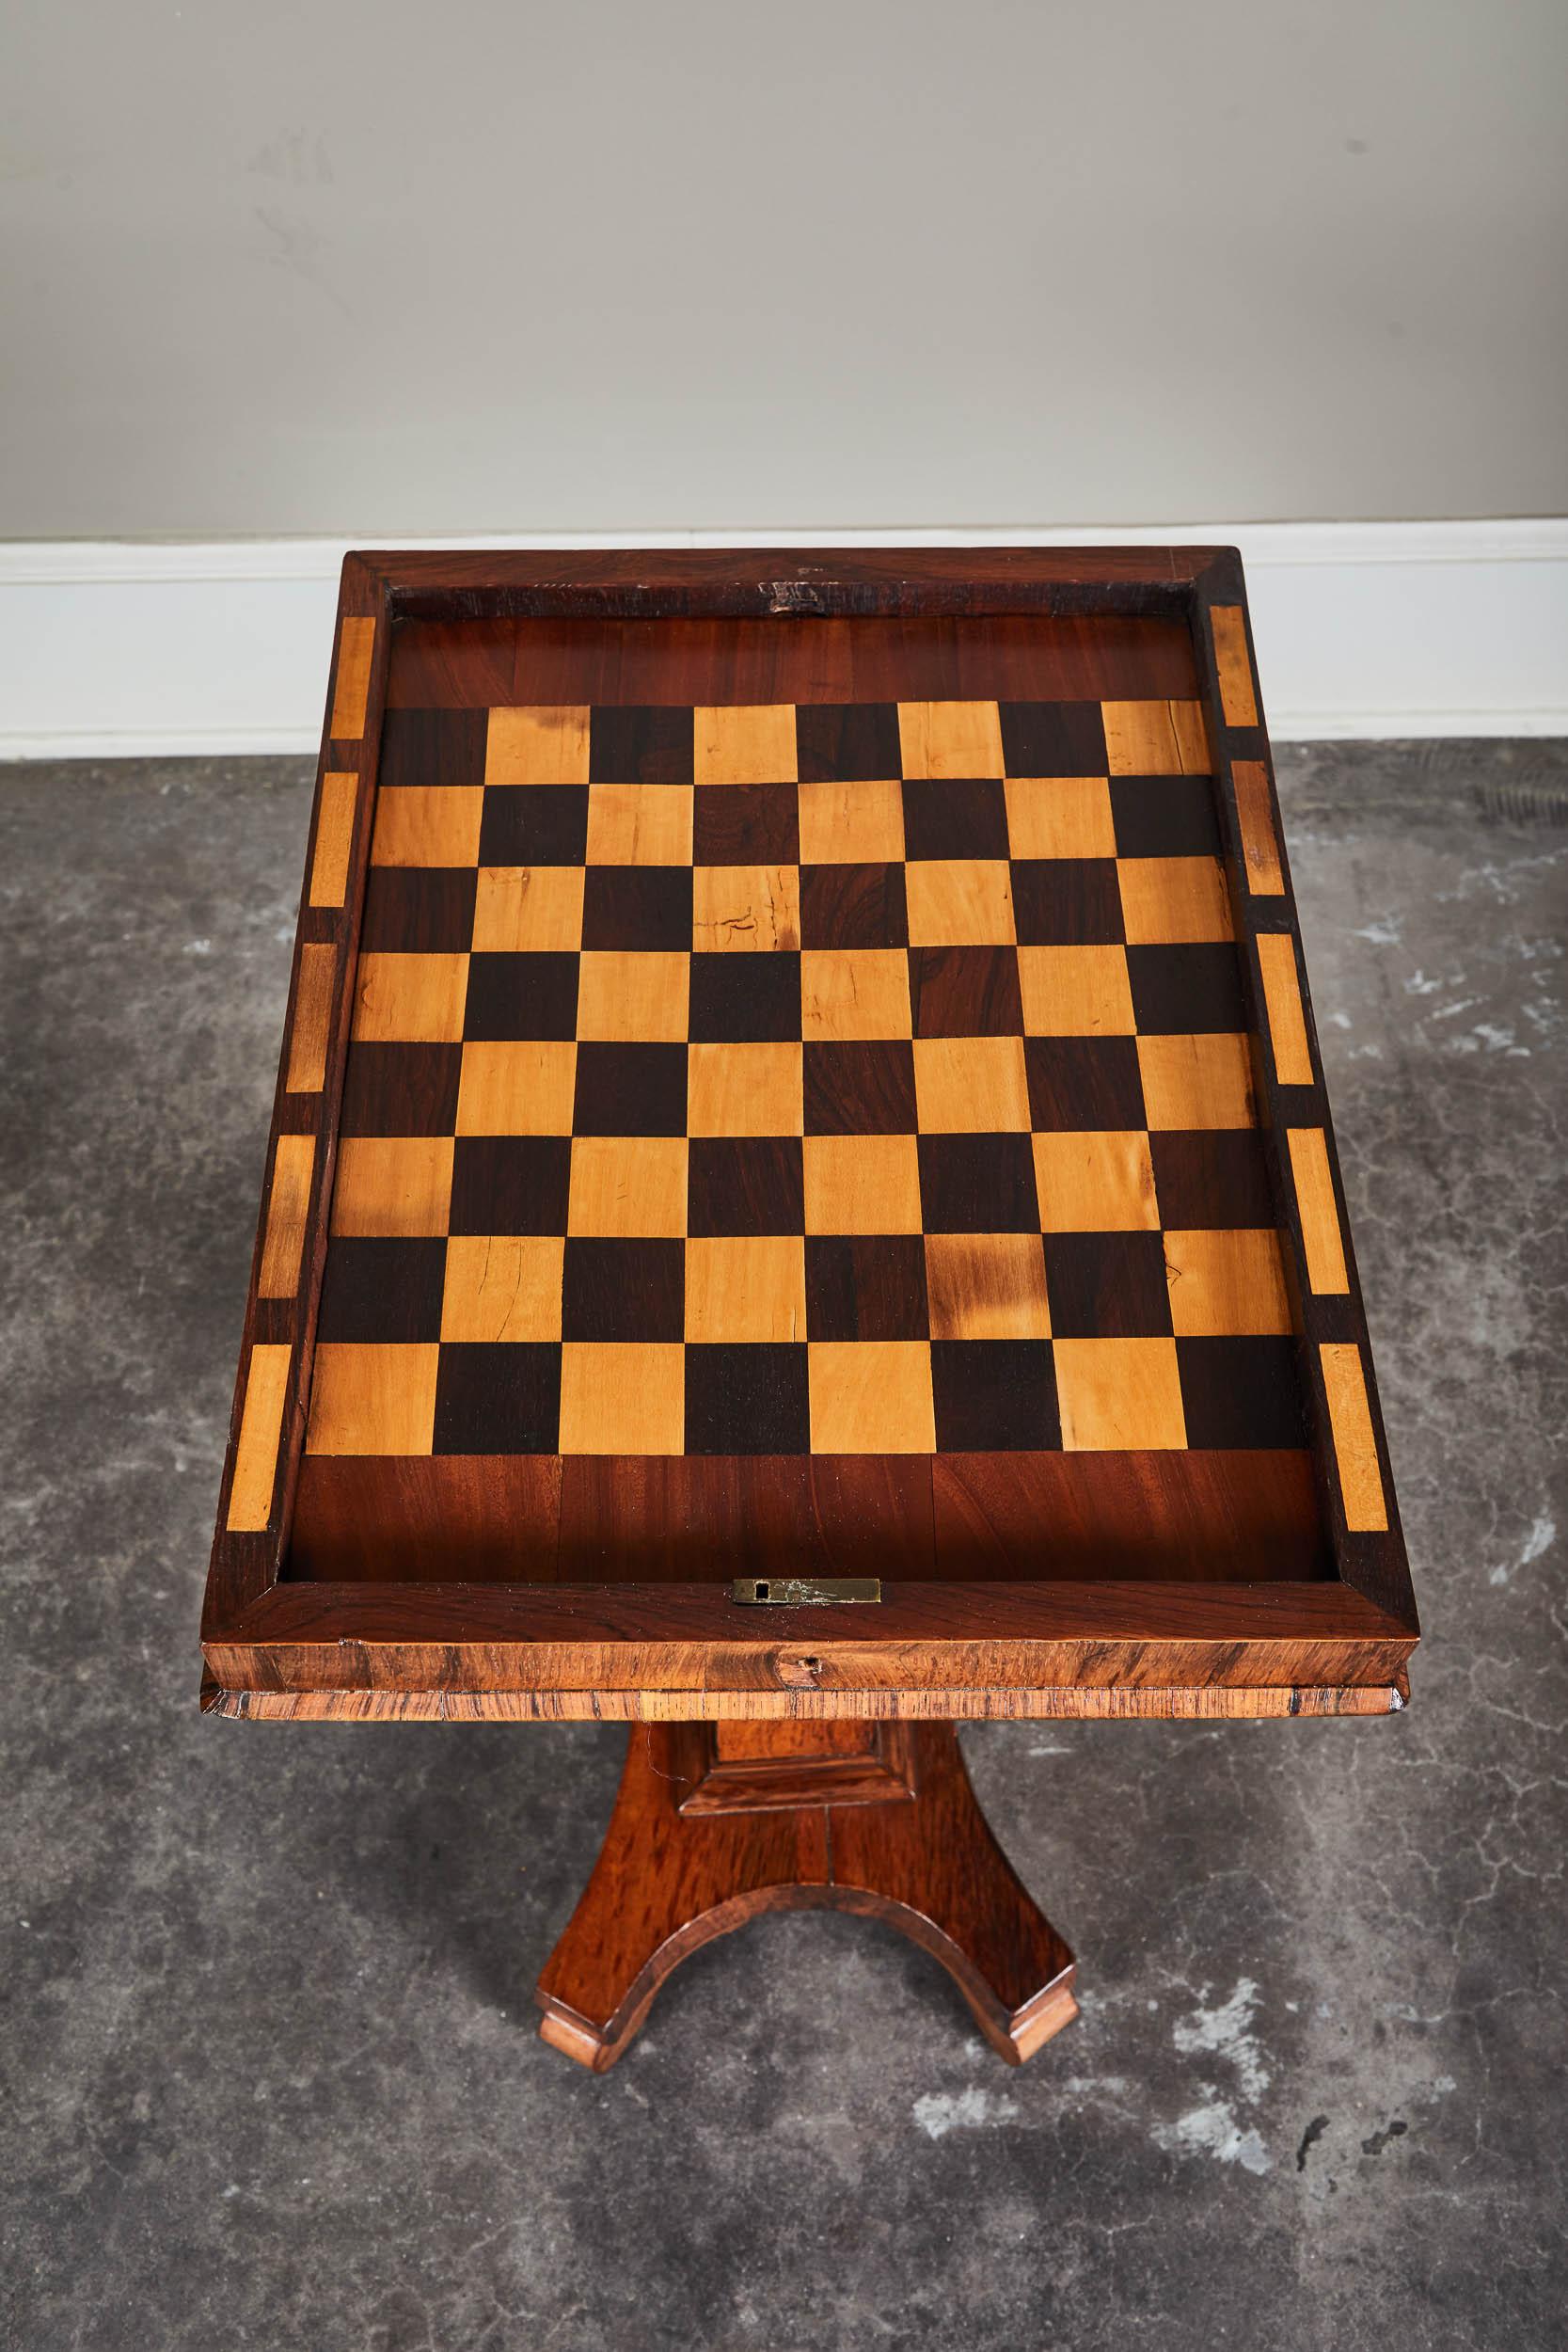 A 19th century English palisander game table. Functional side table with an inlaid chess board under the top. Beautiful palisander wood in great shape. With non-working key.